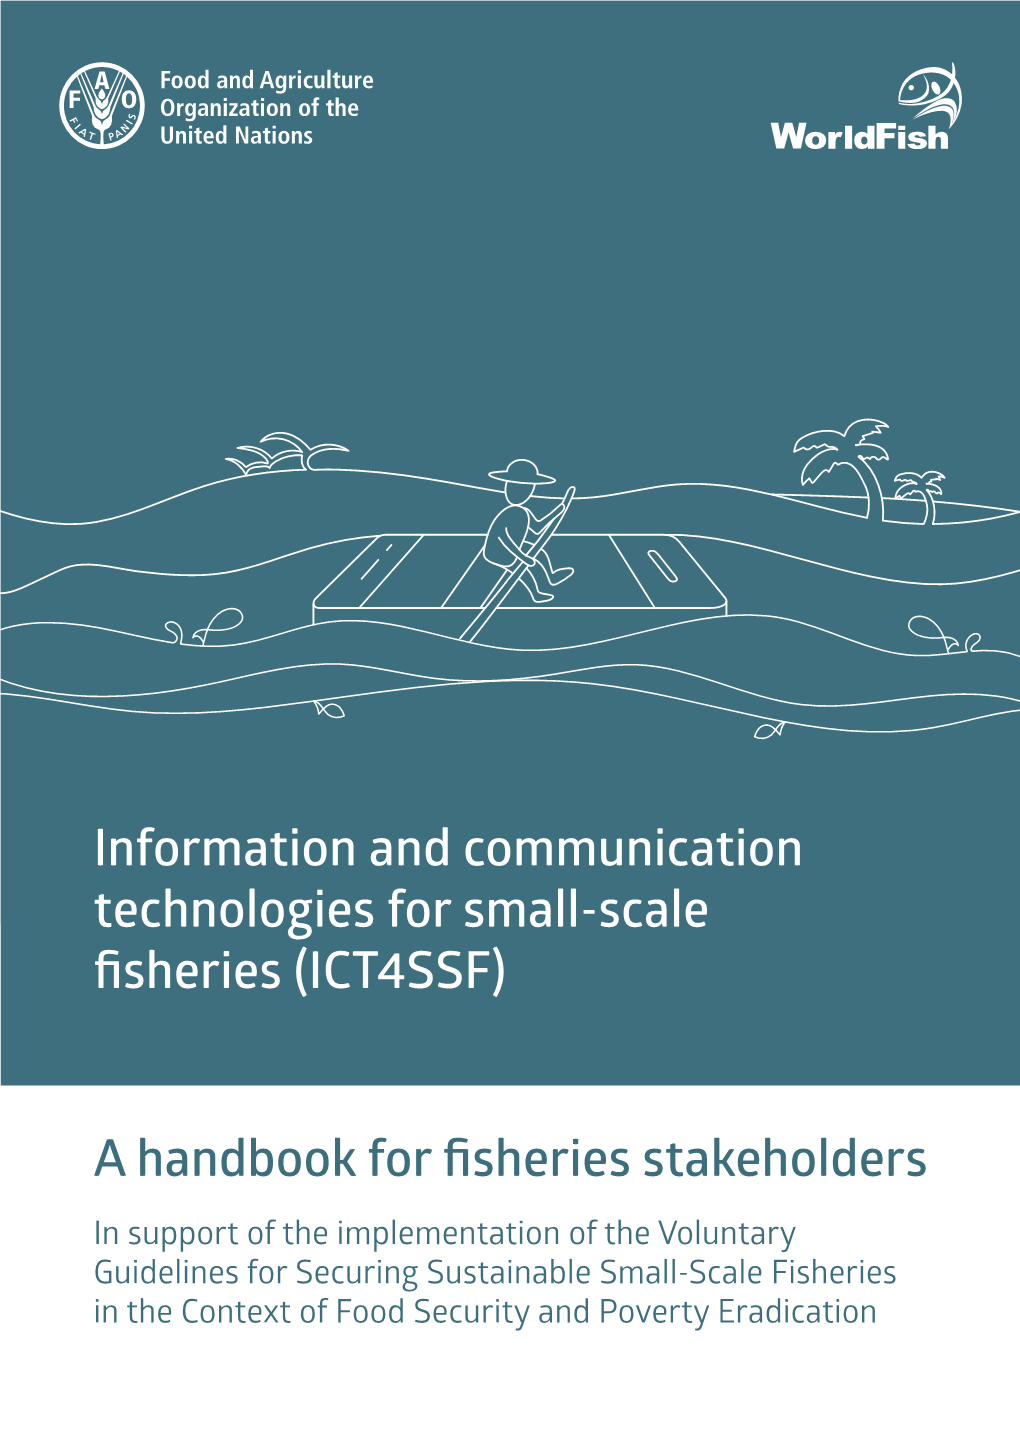 Information and Communication Technologies for Small-Scale Fisheries (ICT4SSF) - a Handbook for Fisheries Stakeholders